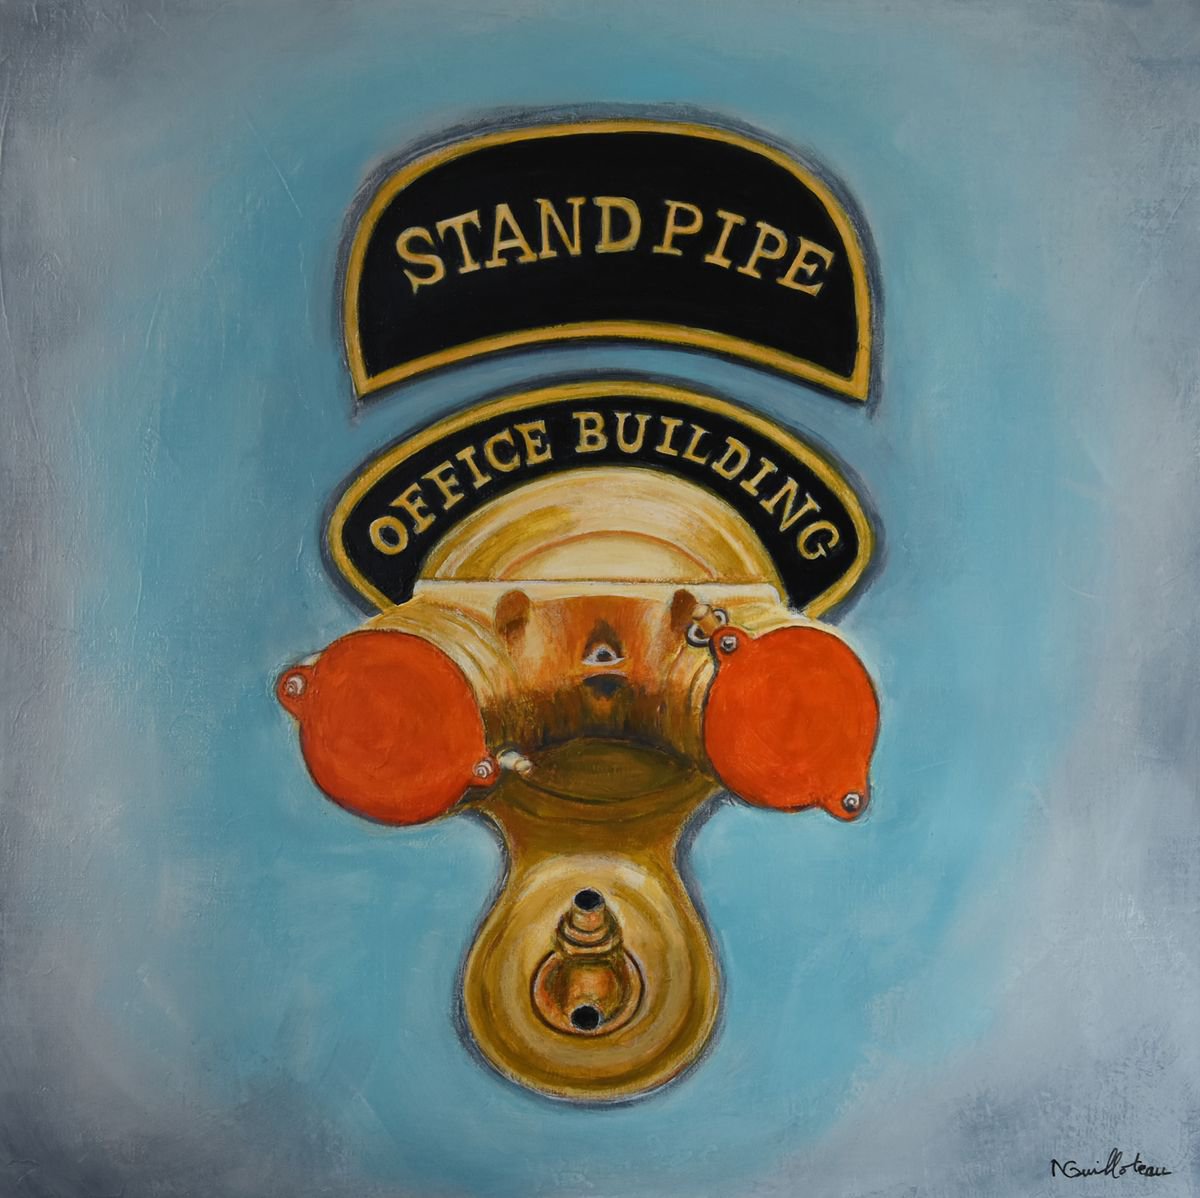 STANDPIPE 0115 - 40x40 cm by Michele Guilloteau